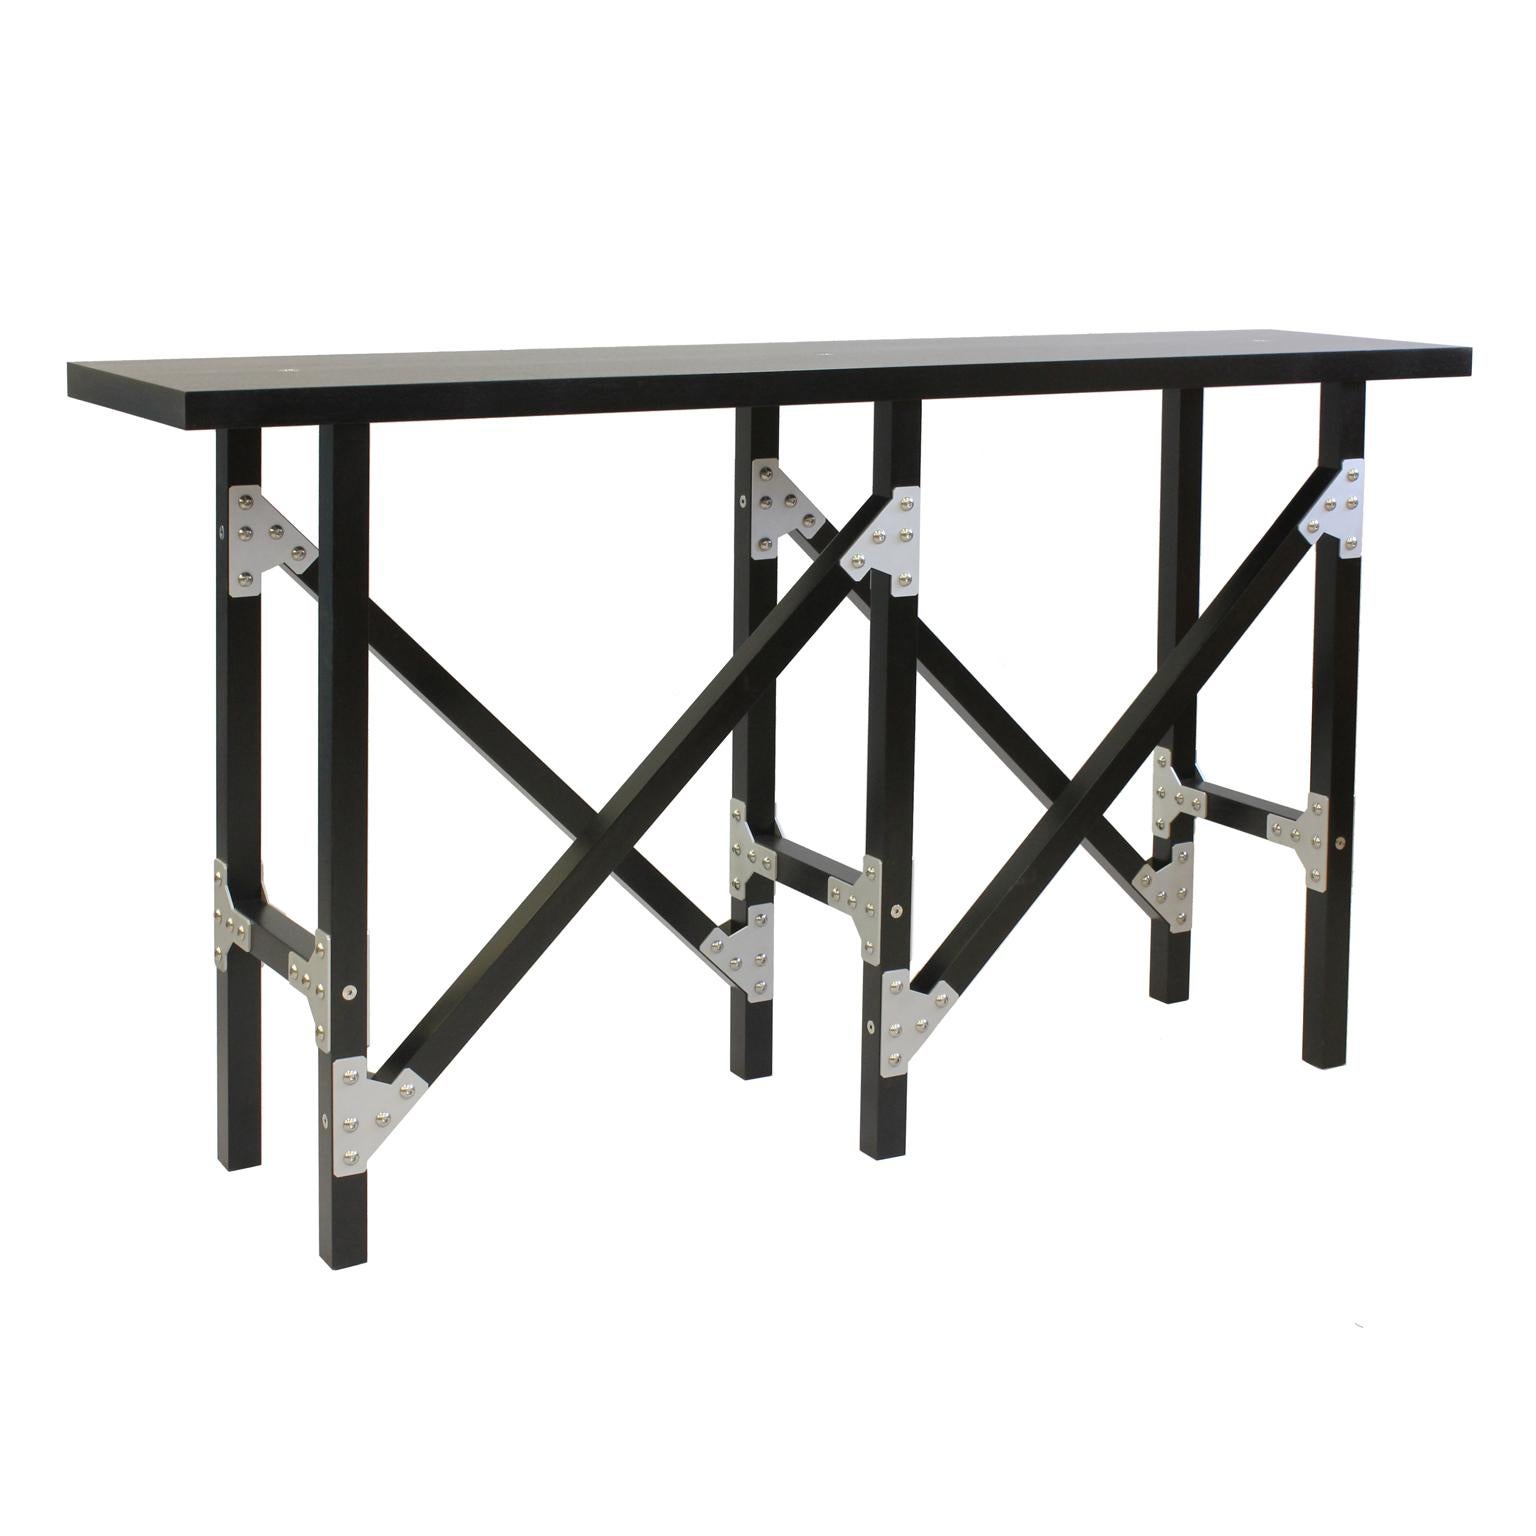 This table continues my exploration of the power of wooden line-like elements and industrial metal bracketry. It introduces the concept of a 45 degree line contrasting against its six vertical legs. The top is punctuated by three polished stainless